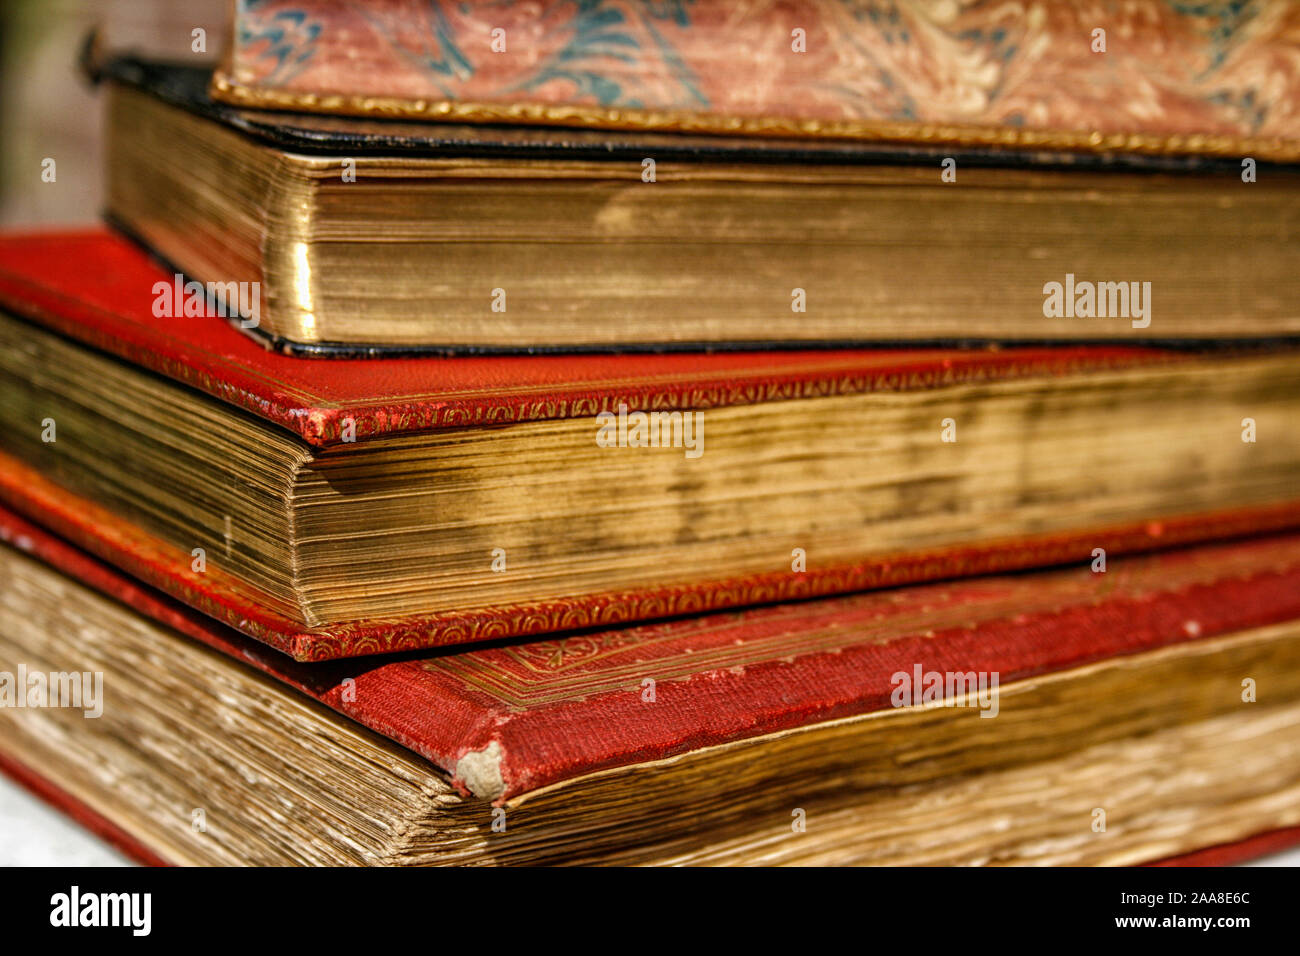 vintage books with special golden coating on pages Stock Photo